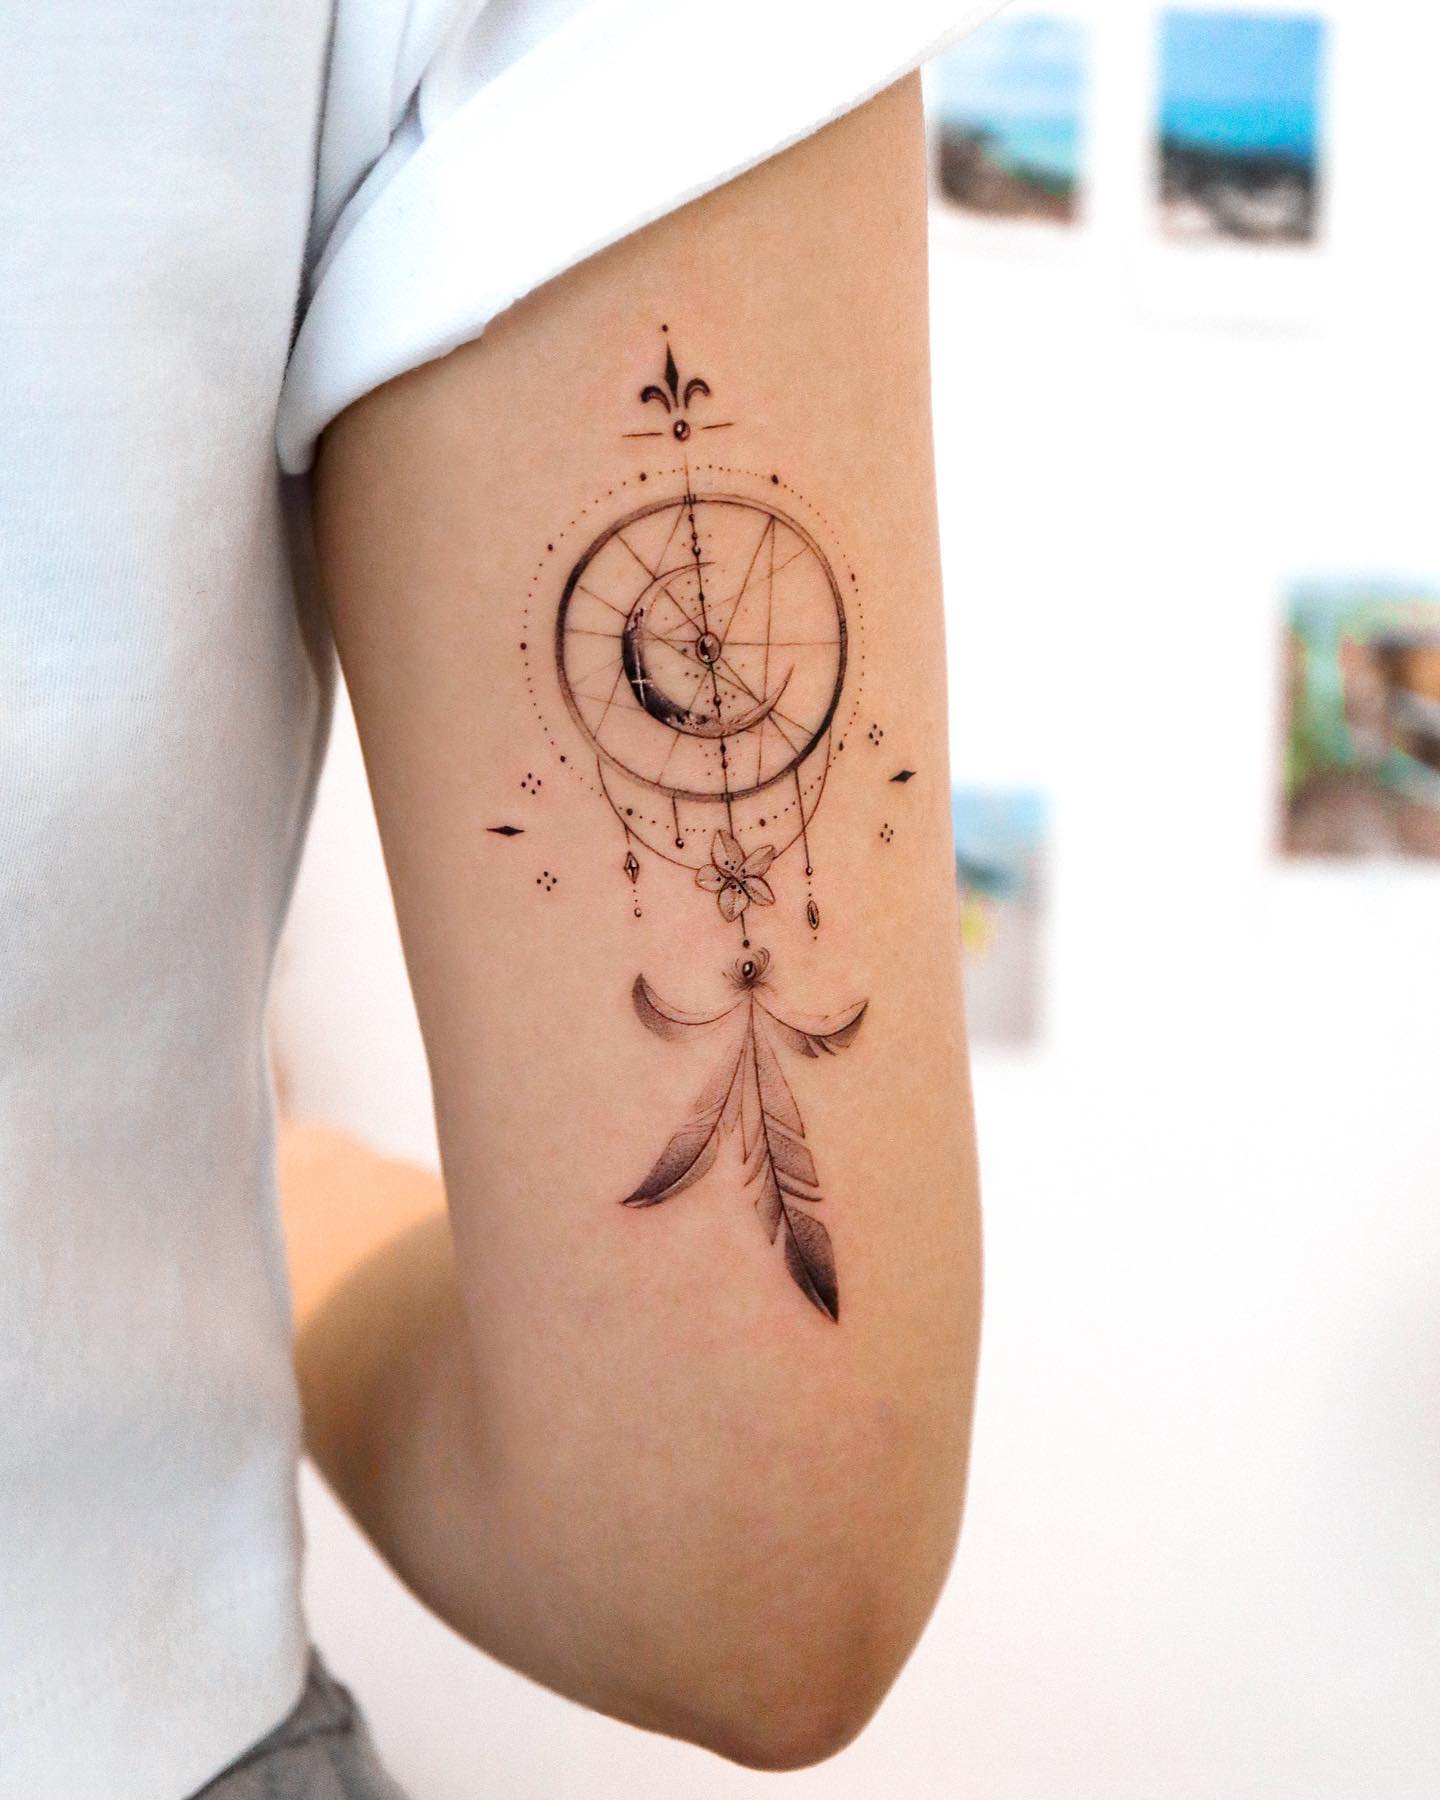 A realistic dream catcher tattoo is a great way to show your love of Native American culture, while also adding a bit of personal flair. With this amazing work, everyone will realize your tattoo!